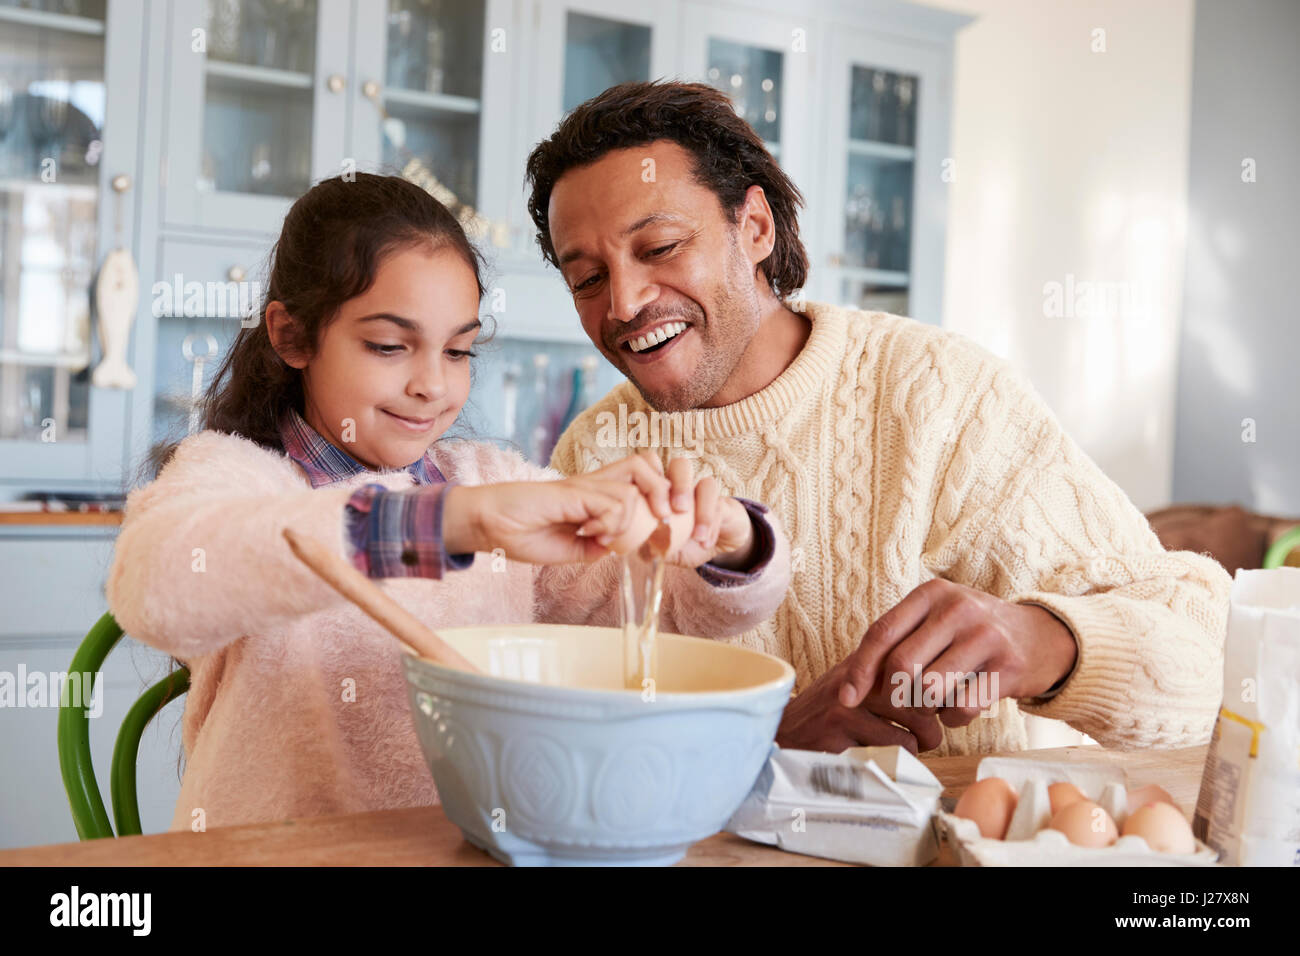 Father And Daughter Baking Cookies At Home Together Stock Photo